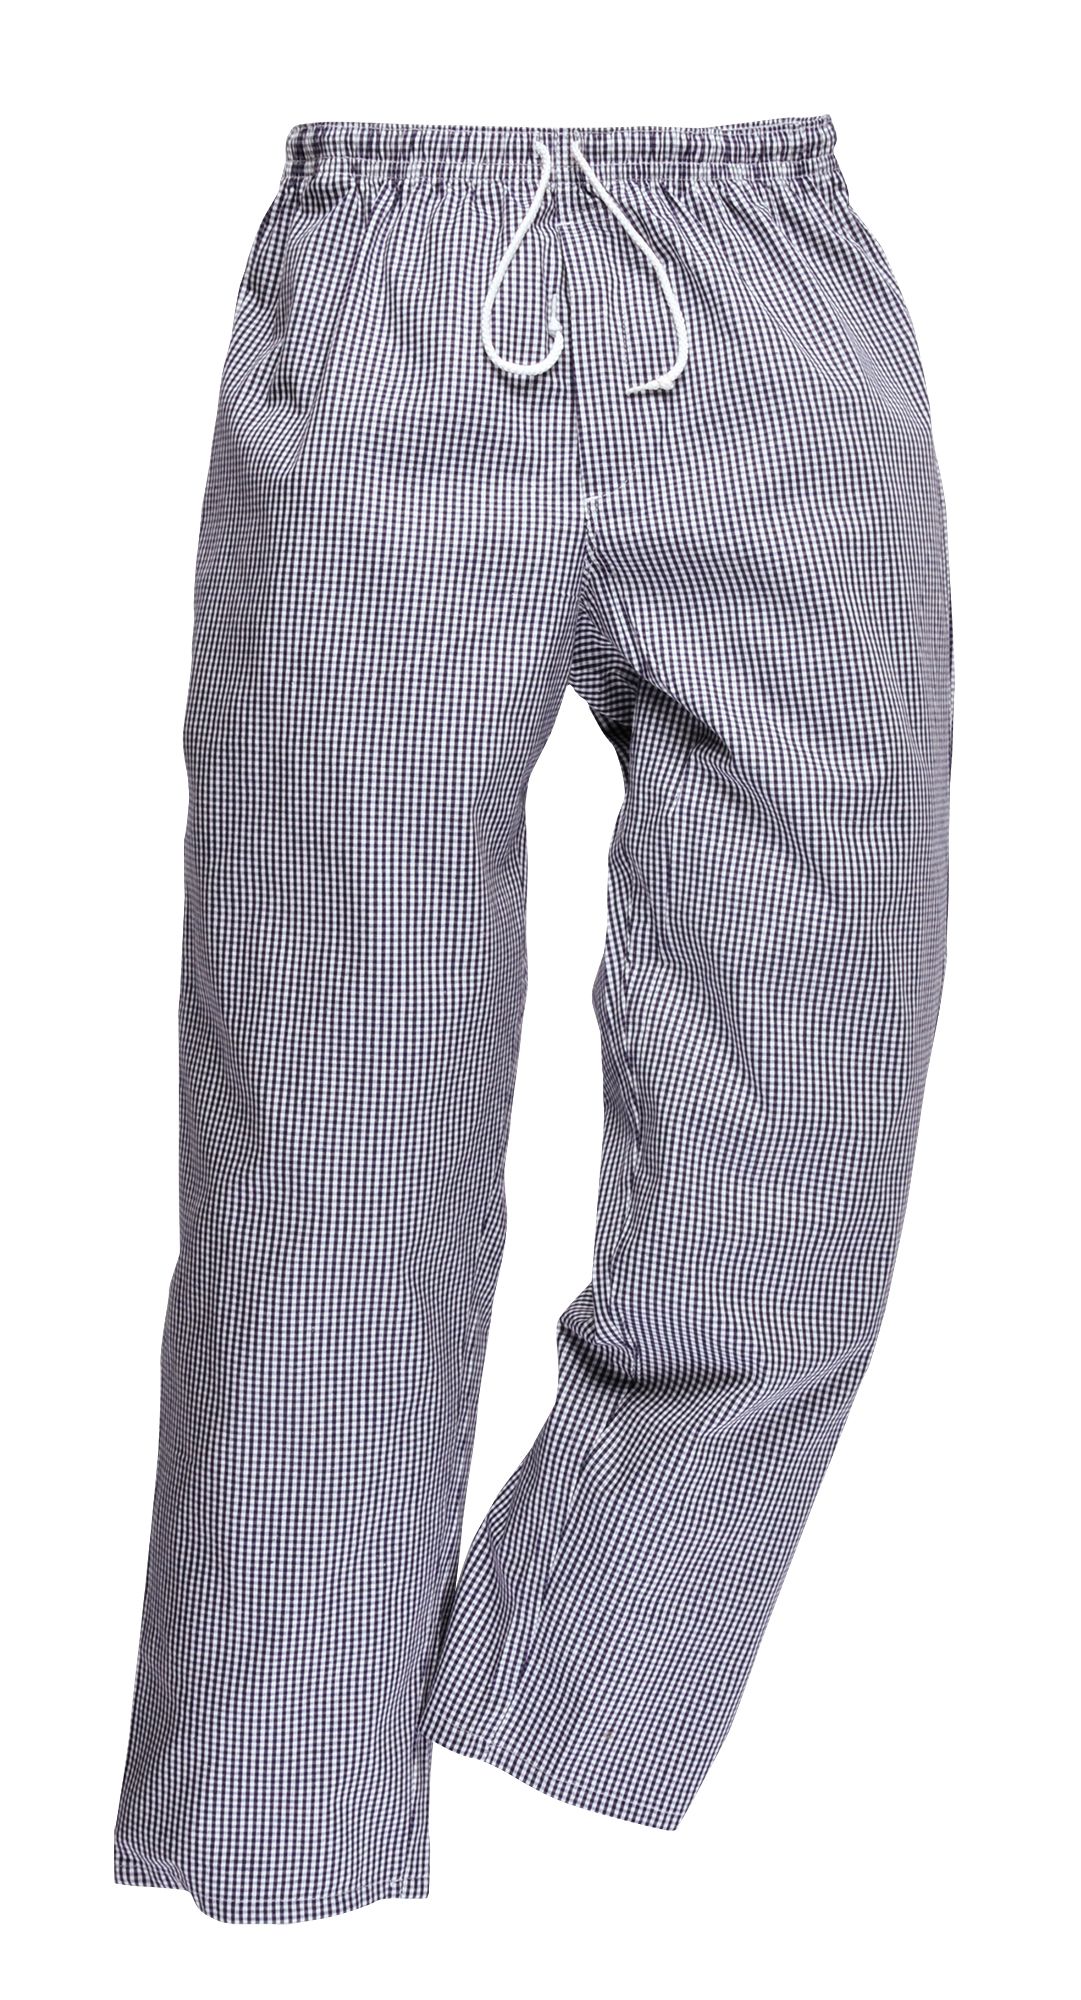 C079 Bromley cotton drawstring chefs trousers